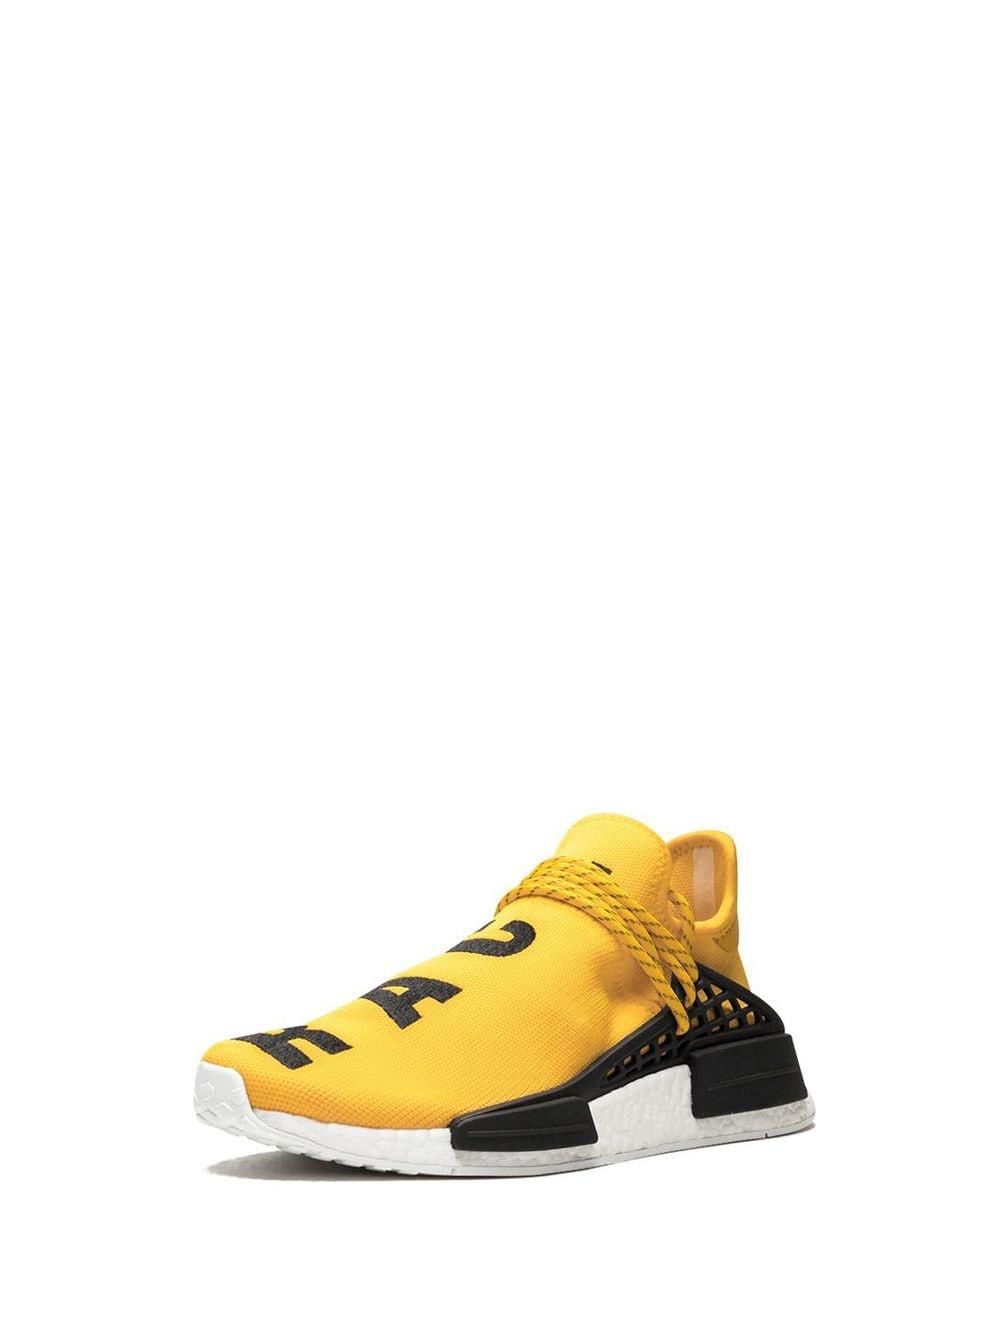 adidas Pw Human 'pharrell' Shoes in Yellow for Men - Lyst